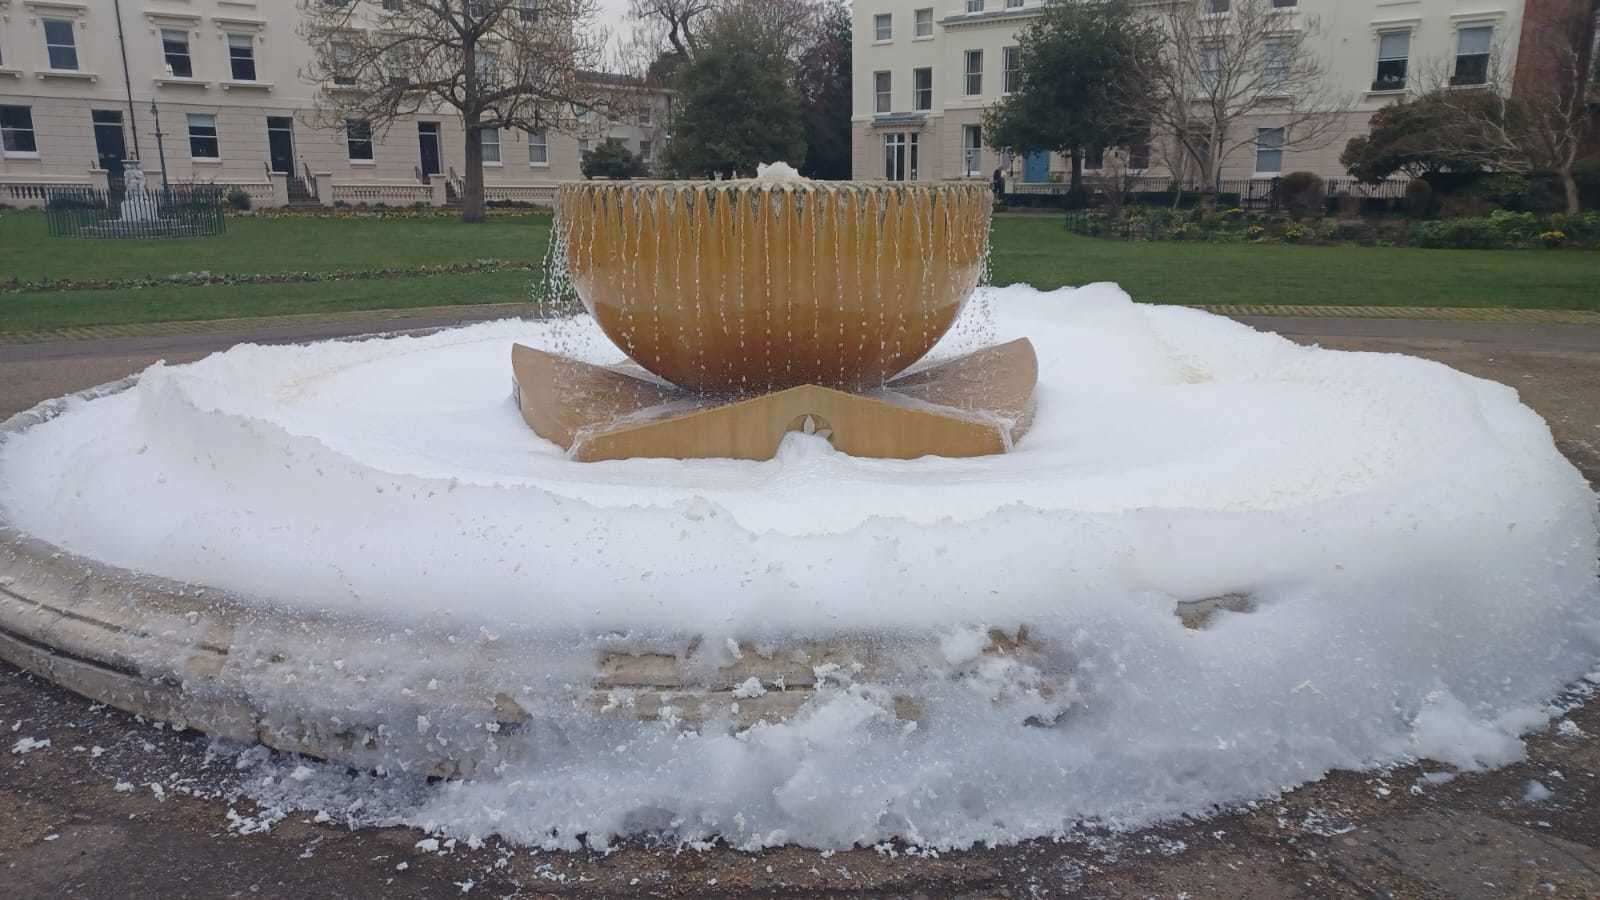 Pranksters filled the Canterbury fountain with soap again last night